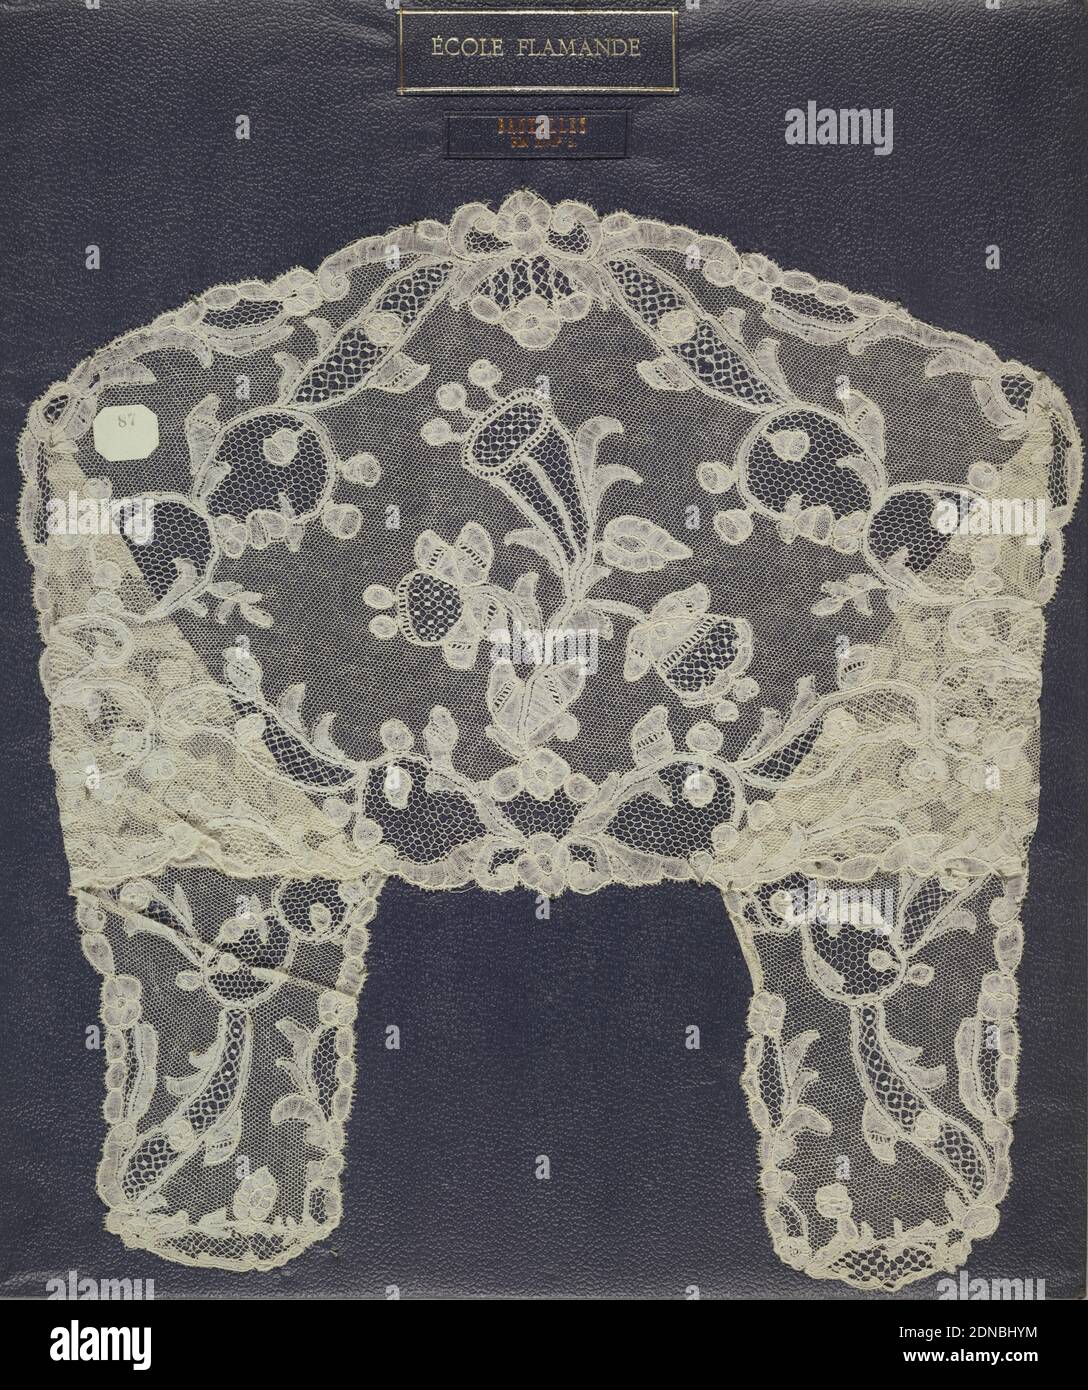 Collar, Technique: bobbin lace, Bobbin lace collar, growing flowering plant, early 18th century Brussels, early 18th century, lace, Collar Stock Photo